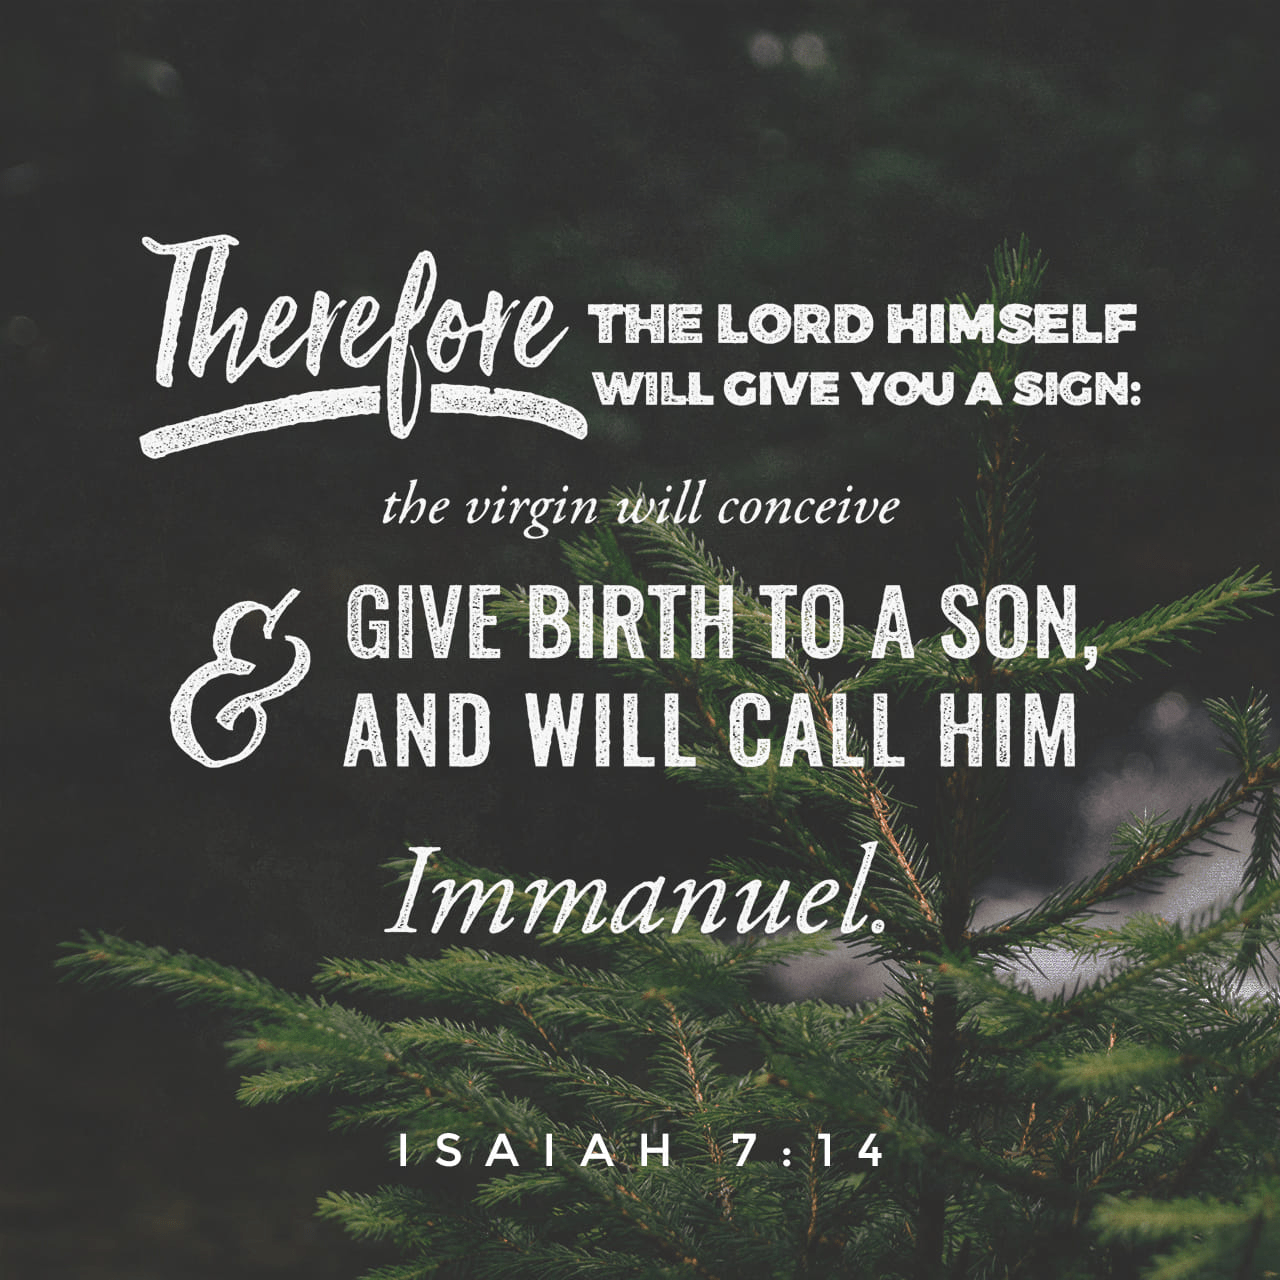 “Therefore the Lord Himself will give you a sign: Behold, a virgin will be with child and bear a son, and she will call His name Immanuel.” ‭‭Isaiah‬ ‭7:14‬ ‭NASB‬‬ 